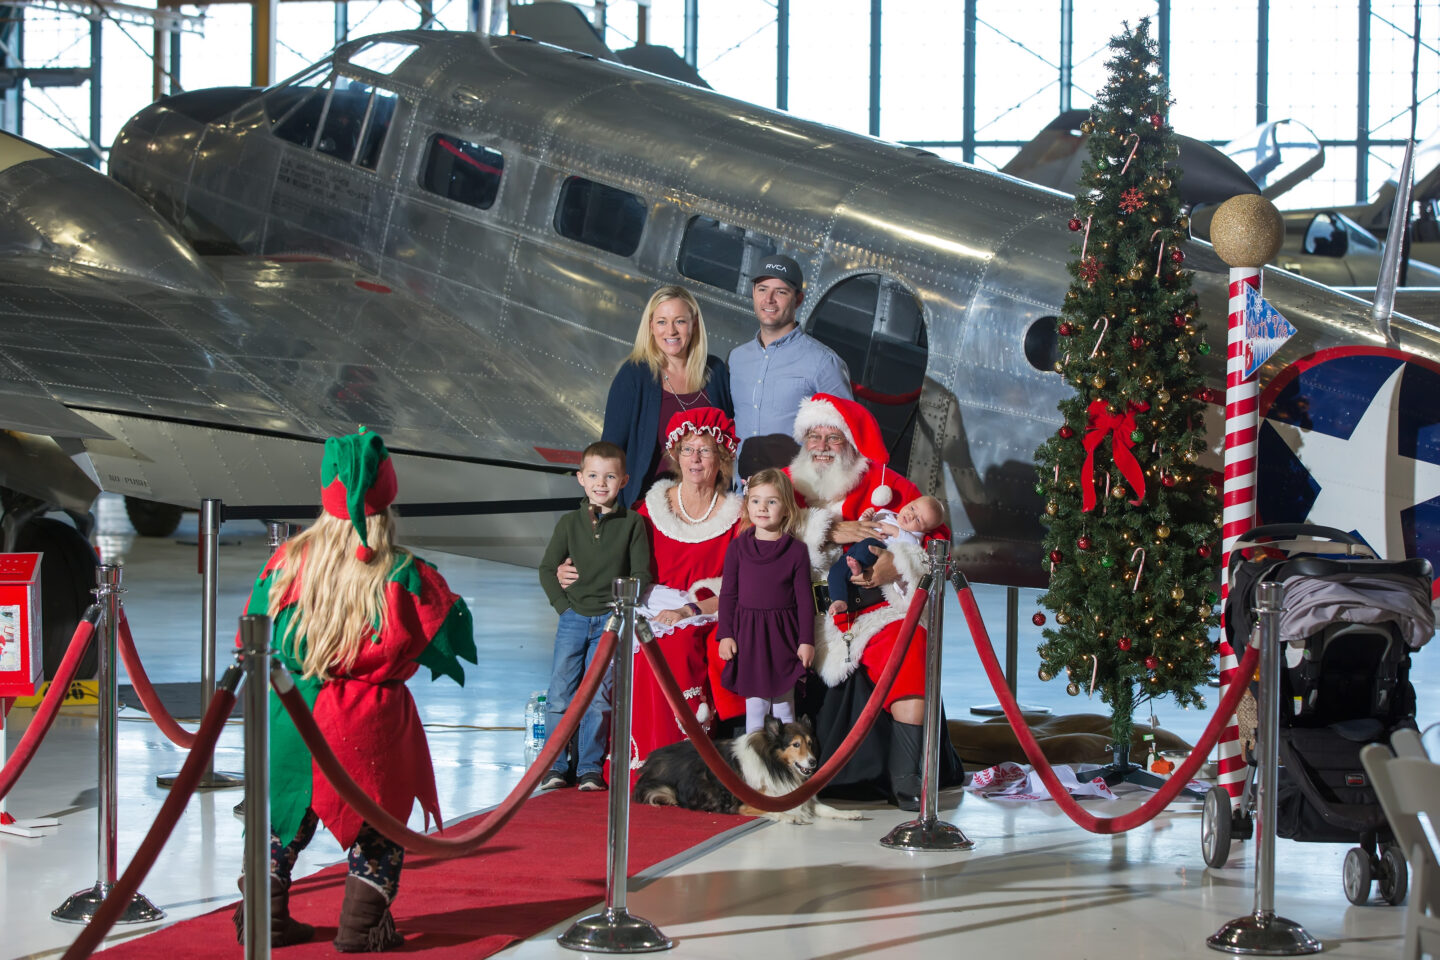 Family photo with Santa in front of an airplane